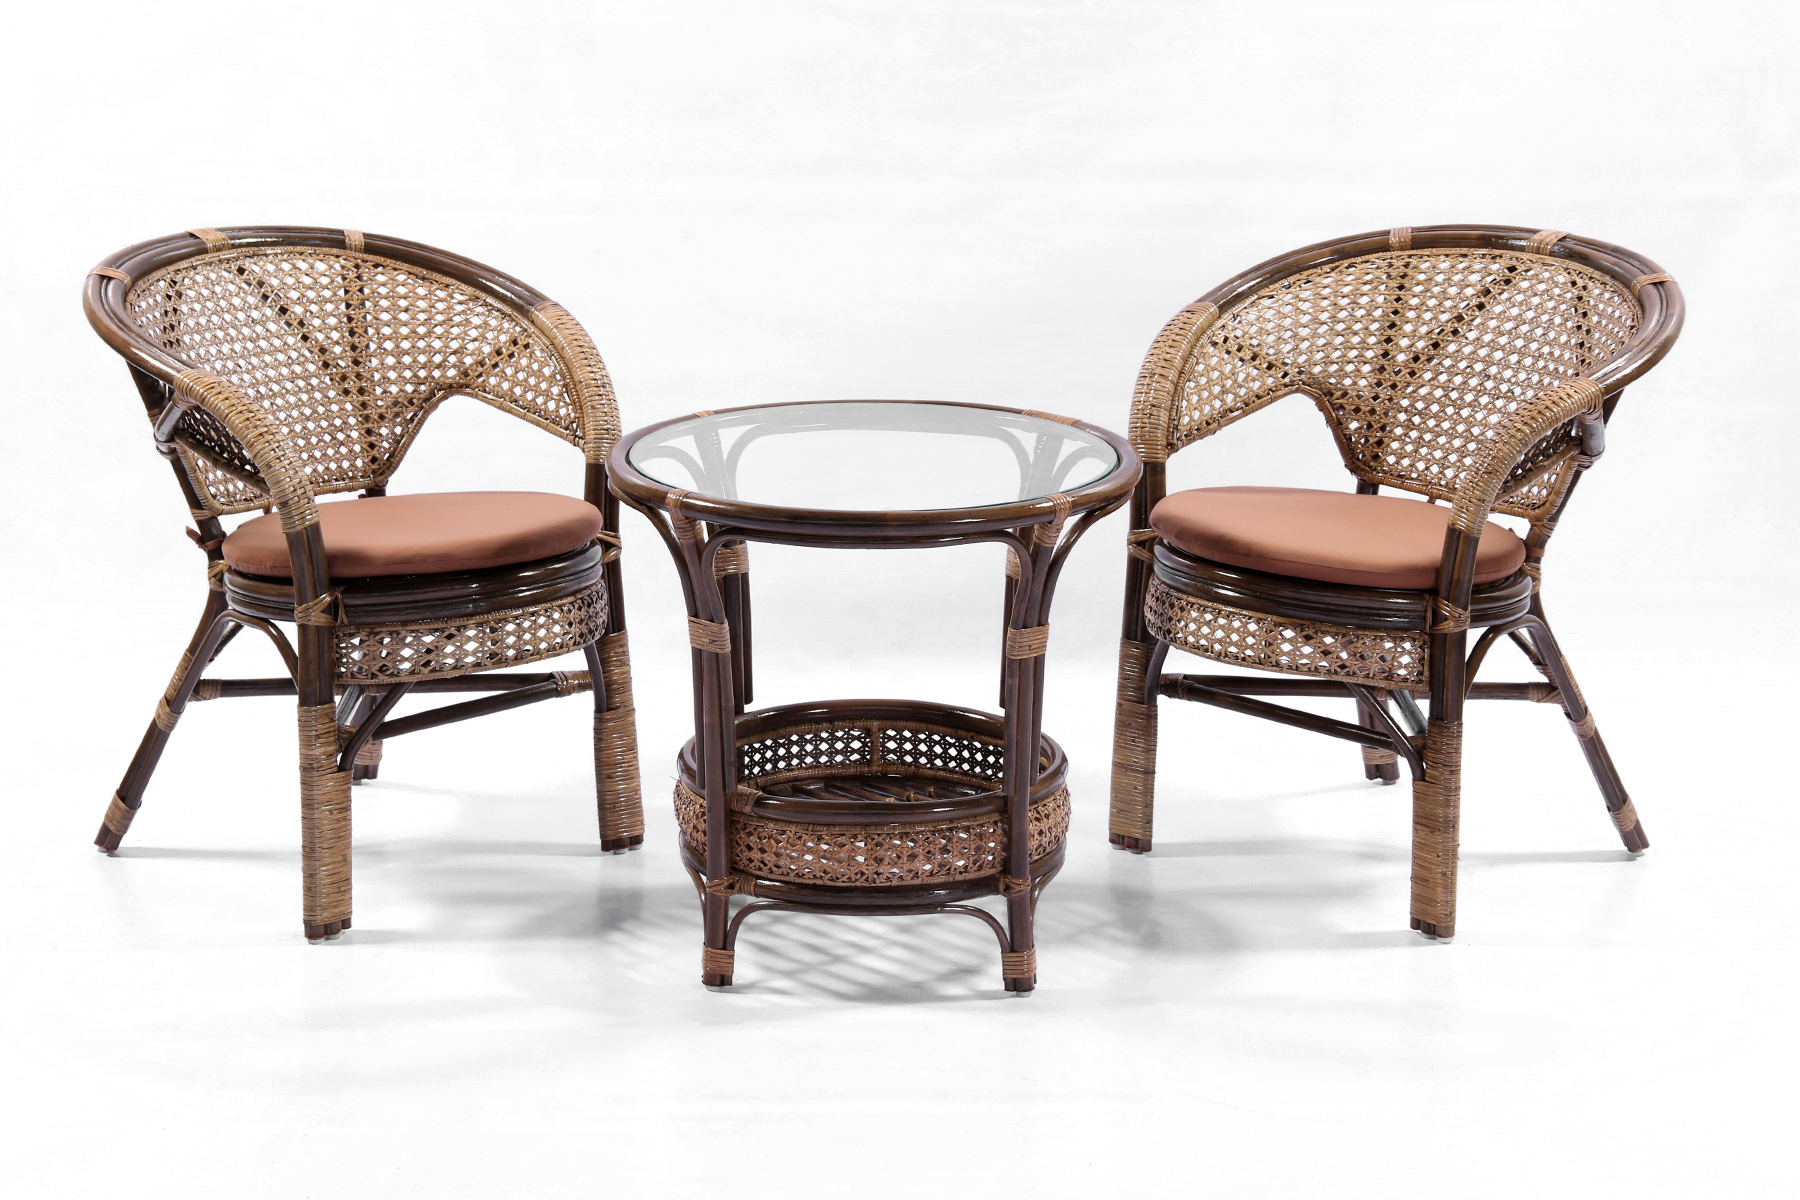 Can You Restain Rattan Furniture